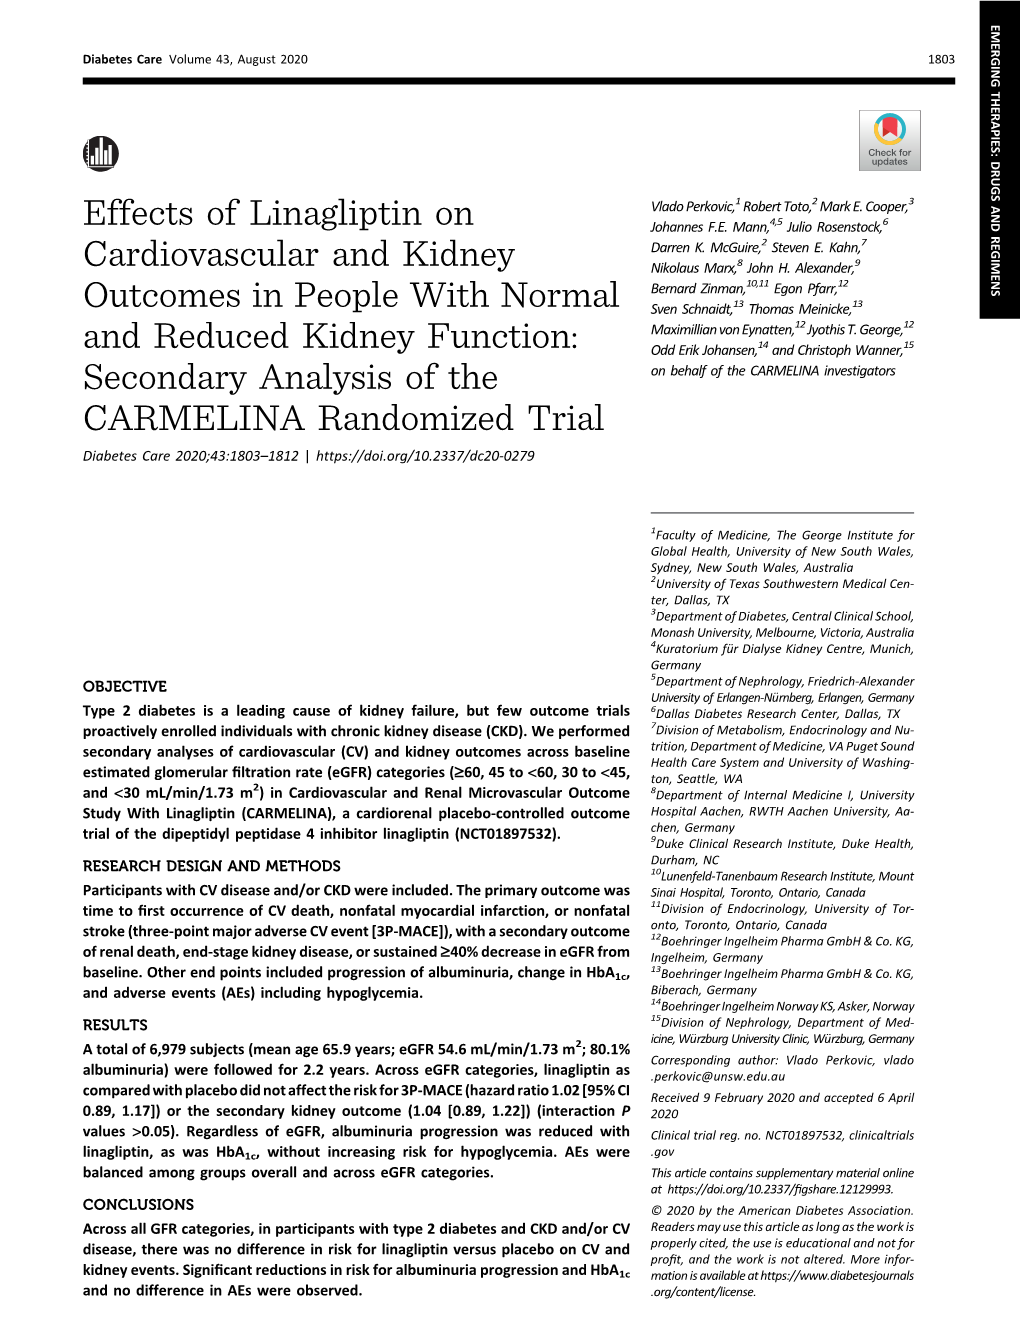 Effects of Linagliptin on Cardiovascular and Kidney Outcomes in People with Normal and Reduced Kidney Function